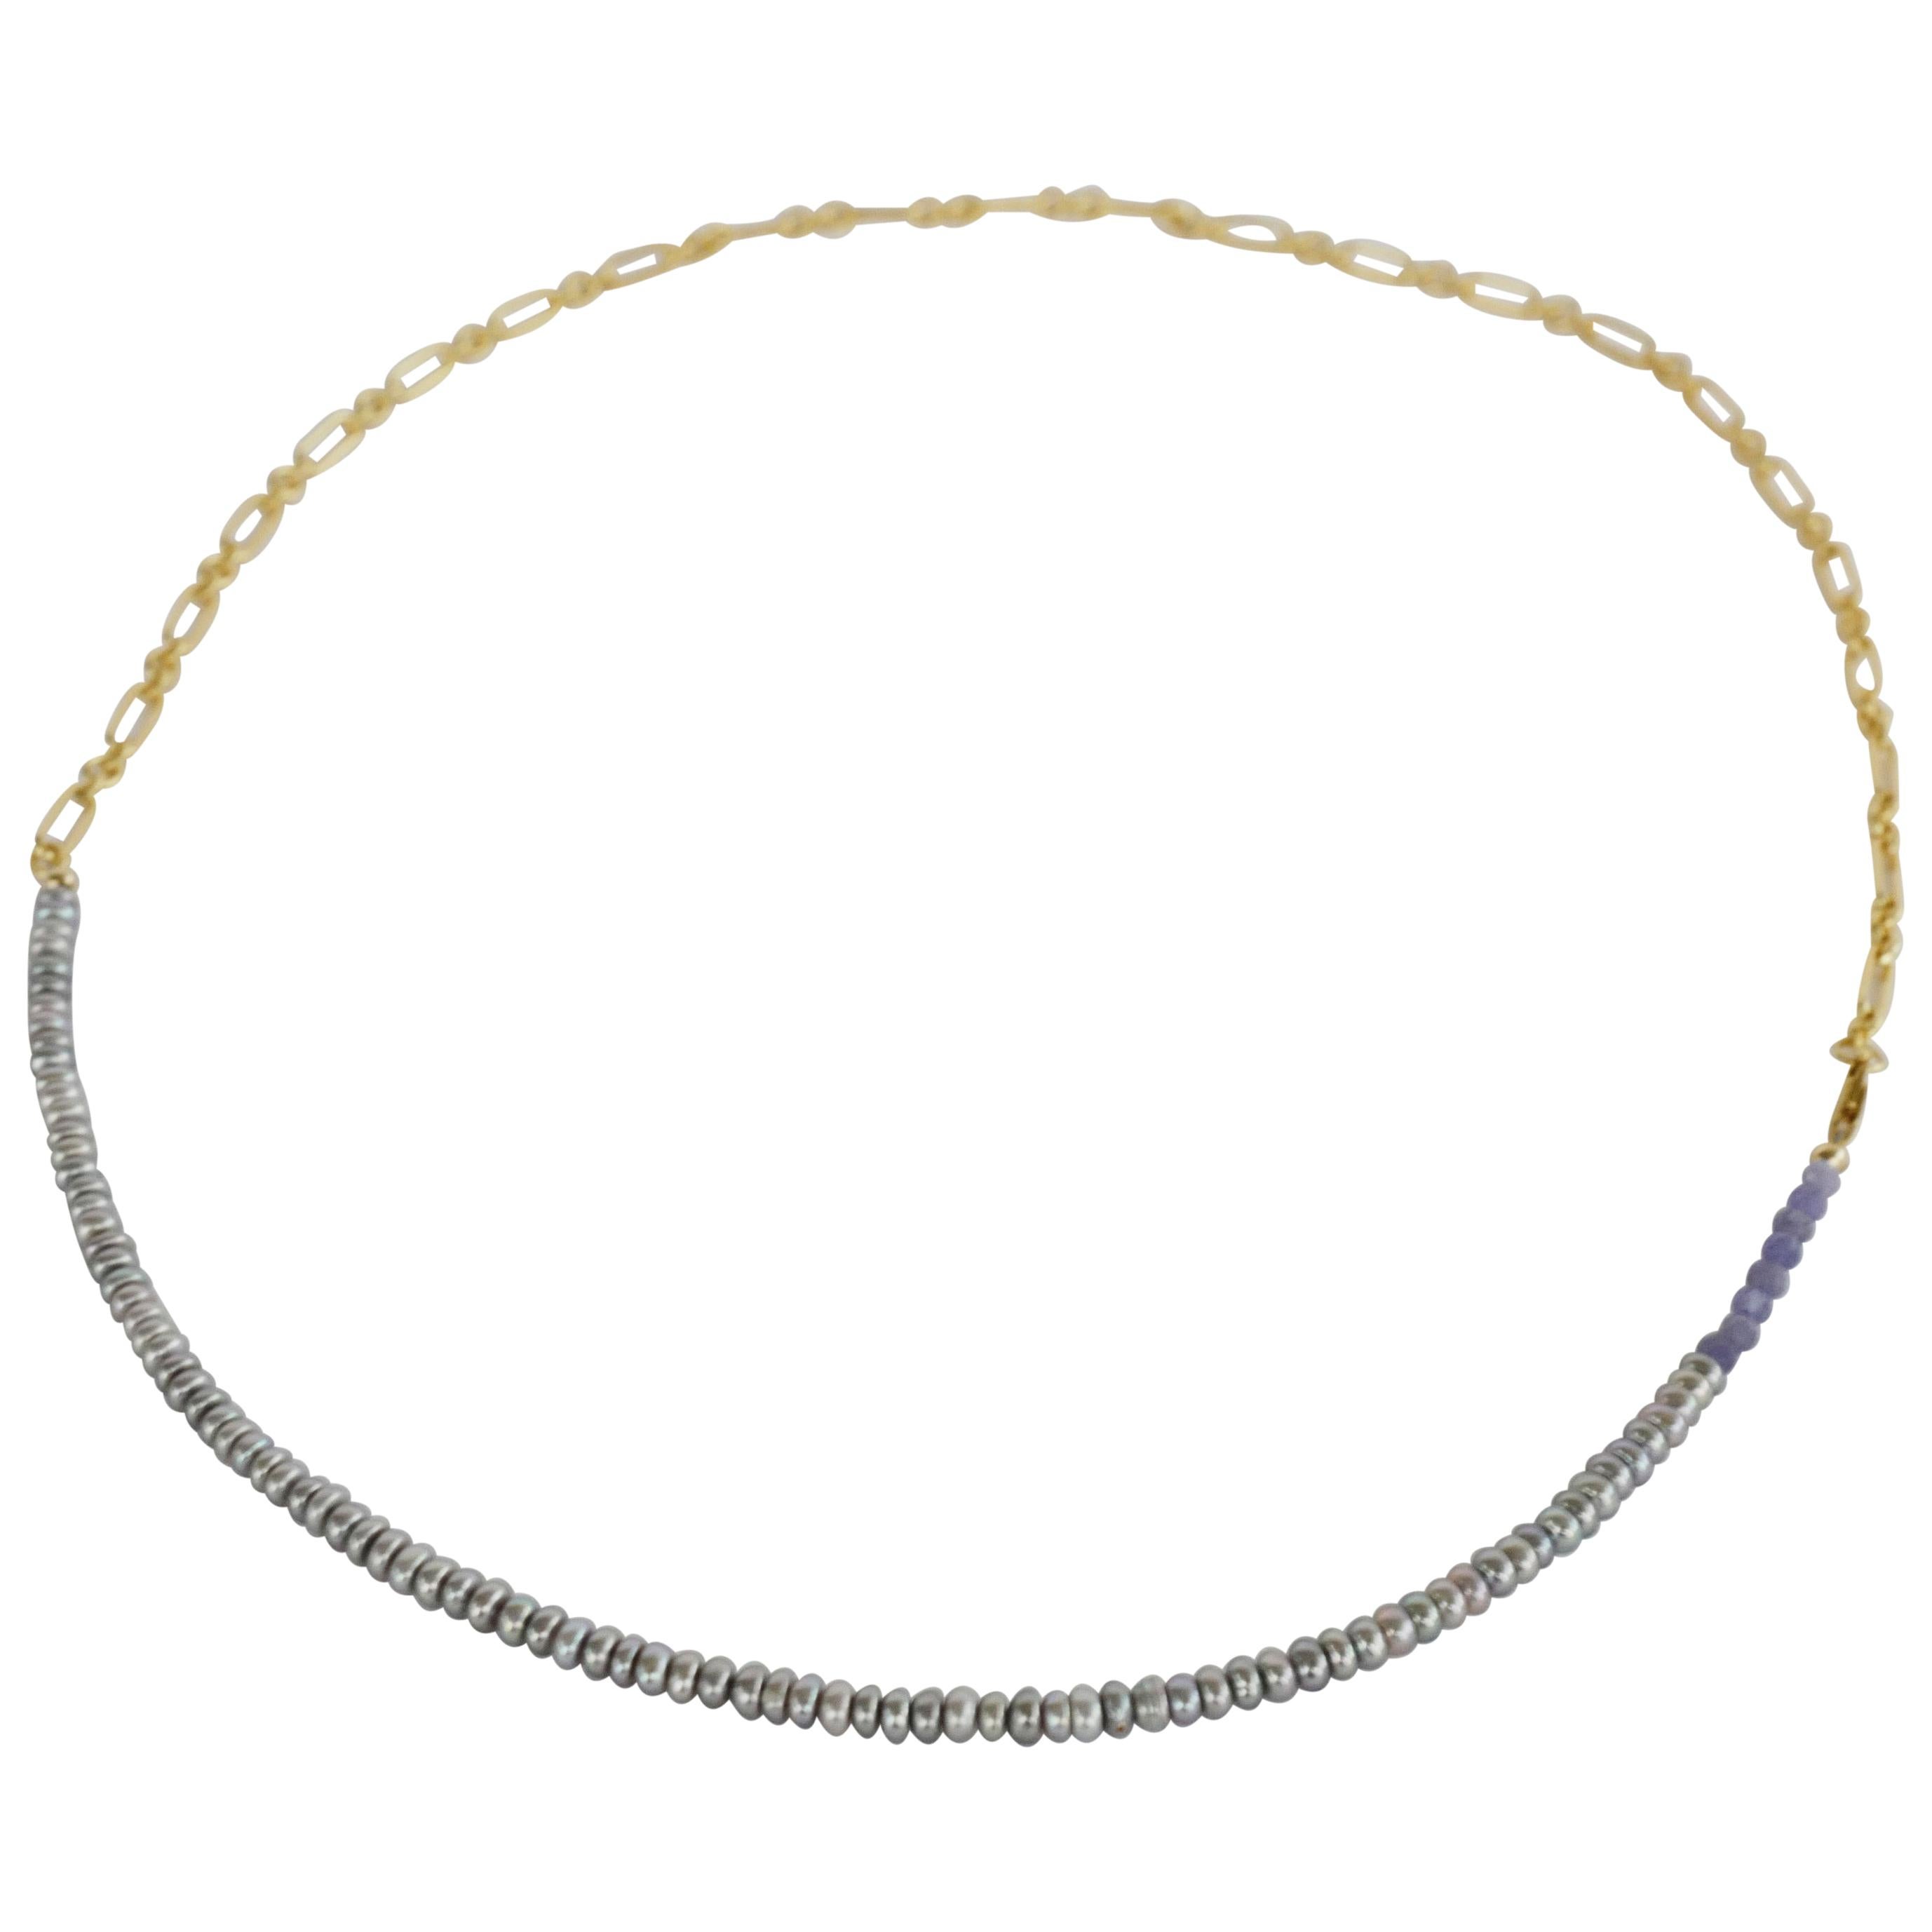 Pearl Necklace Silver Pearl Tanzanite Choker Necklace J Dauphin

